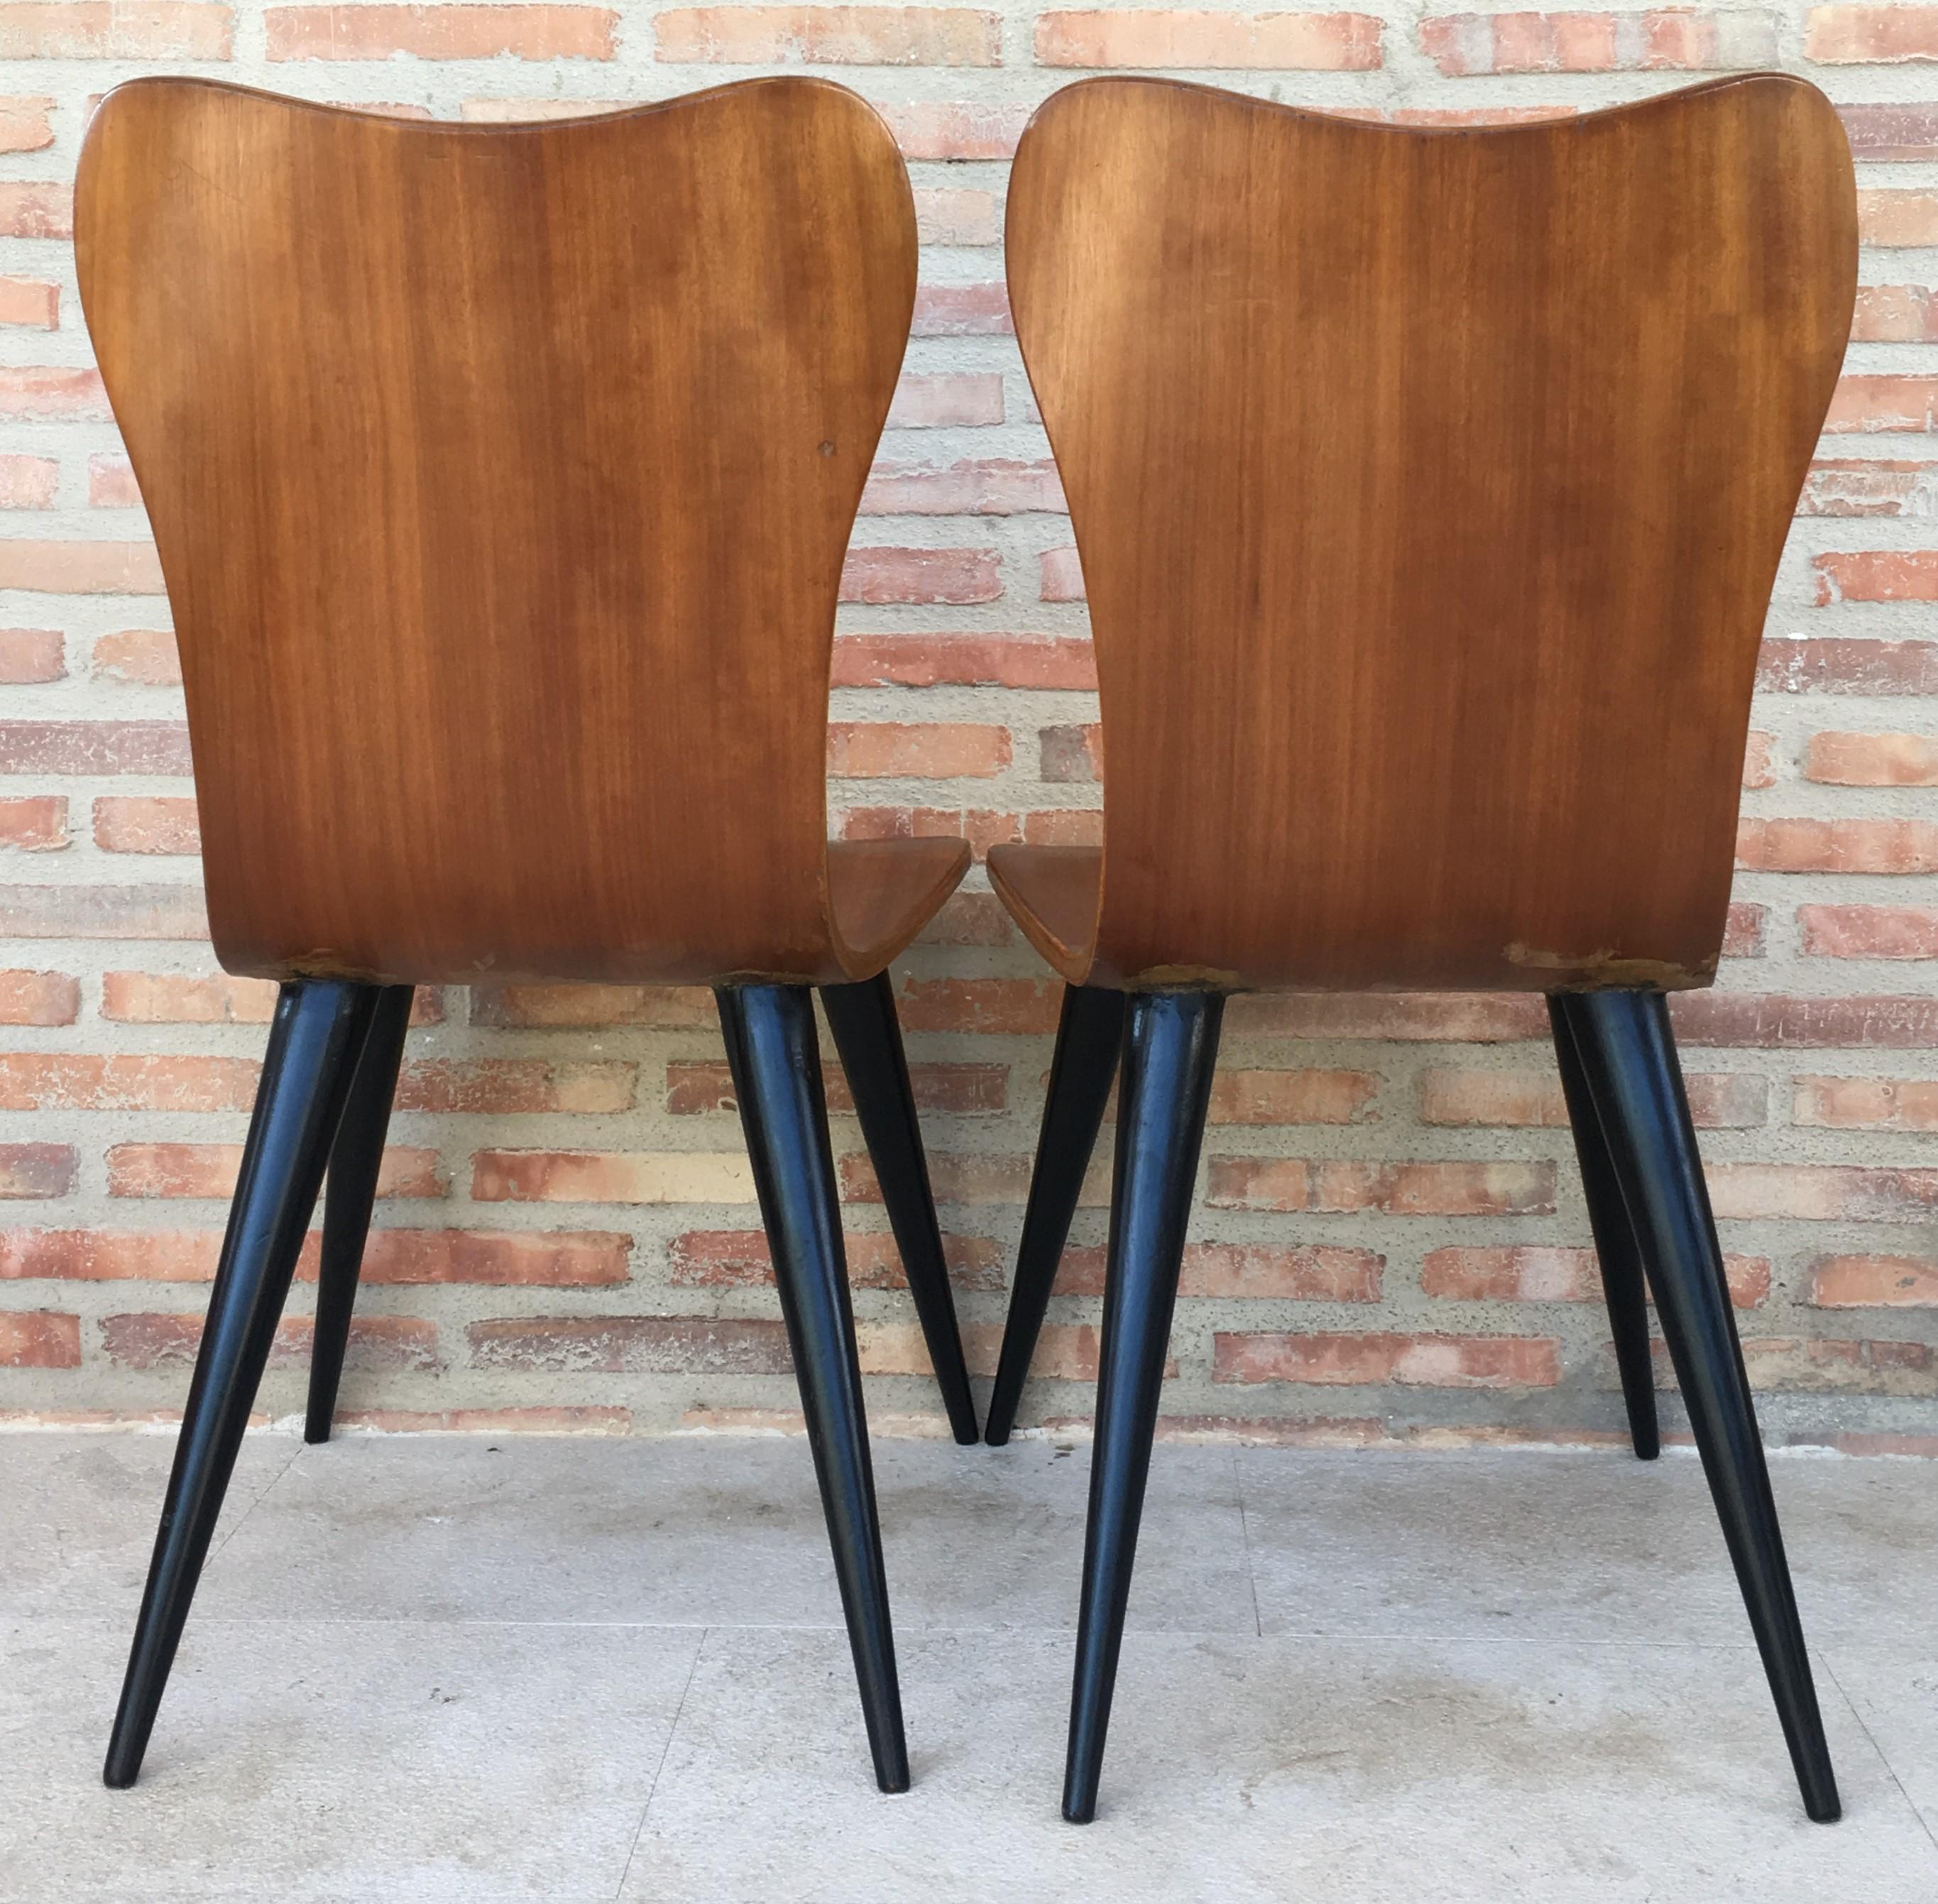 Pair of Midcentury Arne Jacobsen Style Chairs with Black Tapered Legs For Sale 1